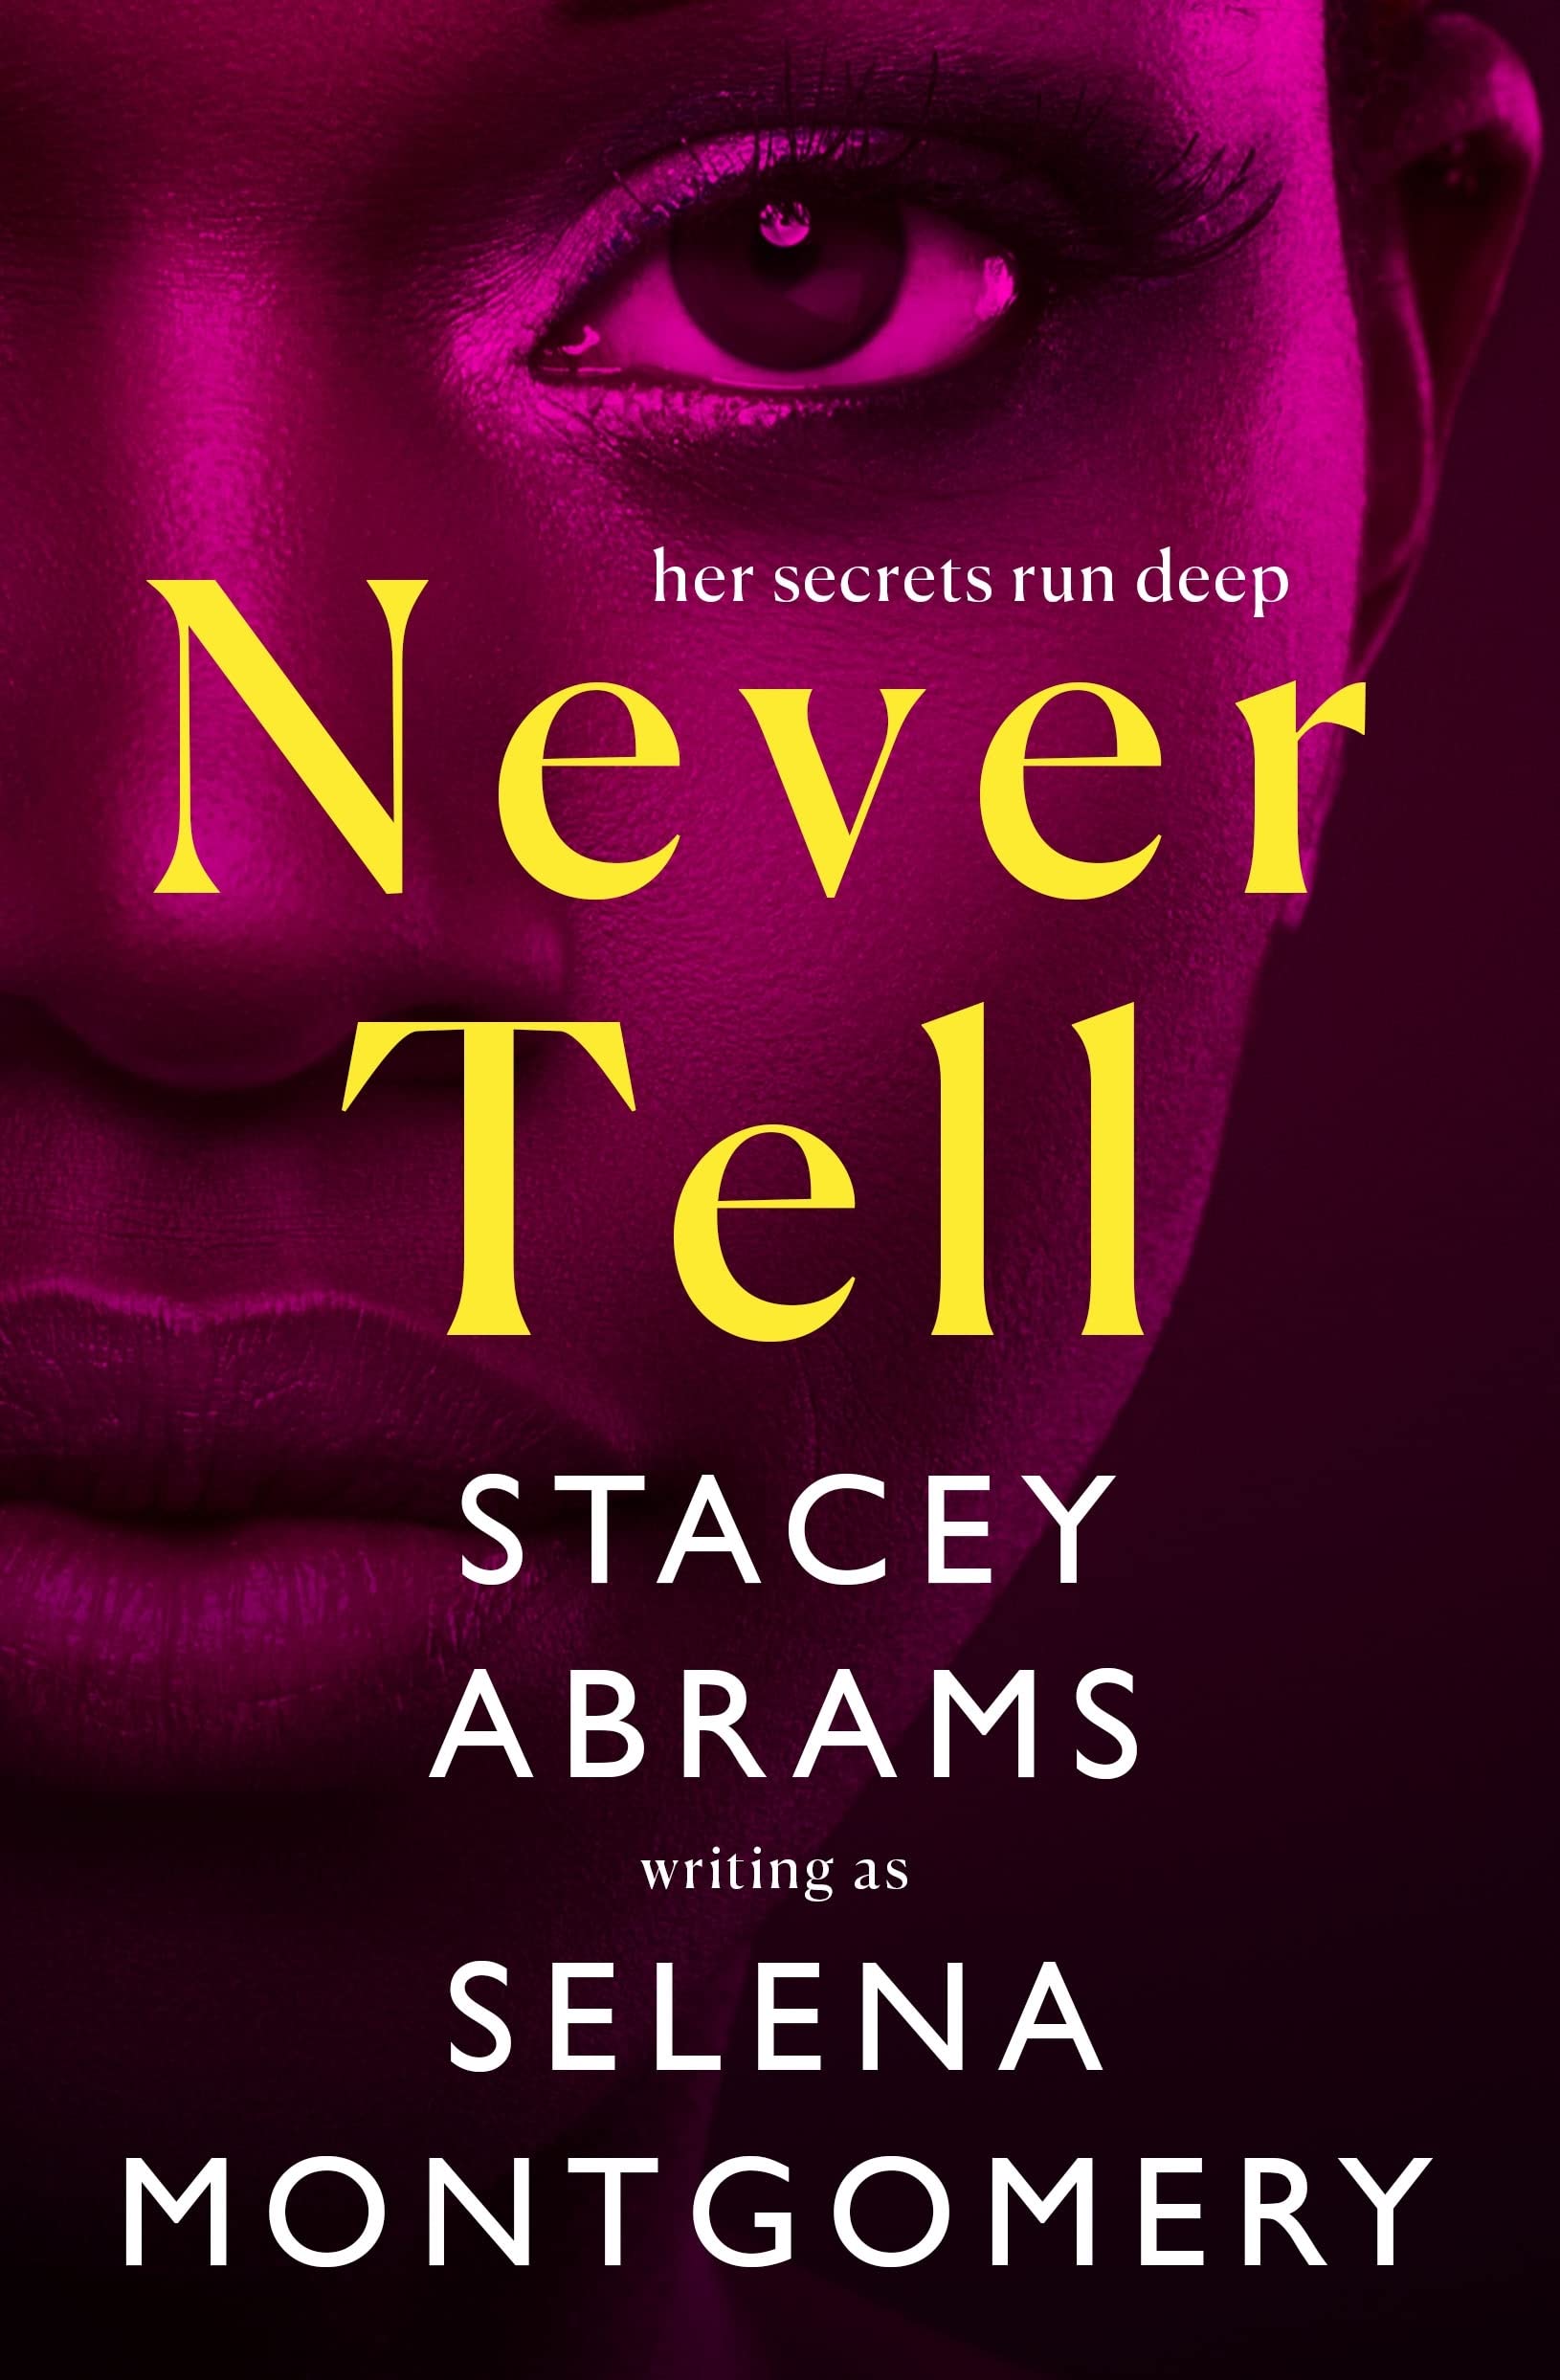 Image for "Never Tell"